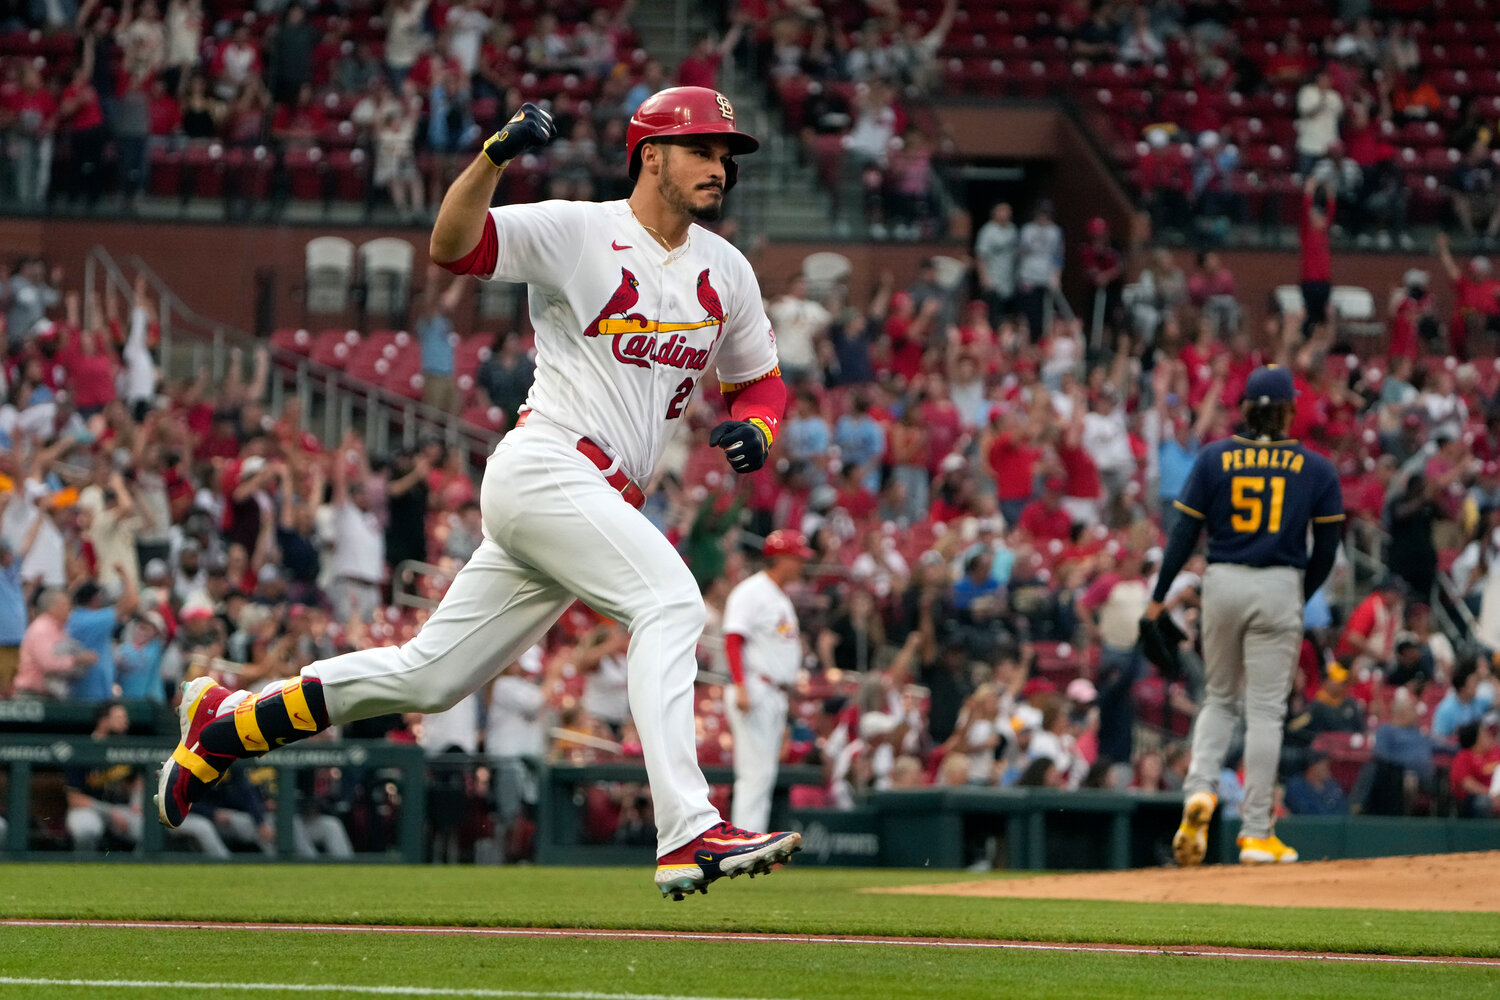 St. Louis Cardinals' Nolan Arenado, left, celebrates as he rounds the bases after hitting a three-run home run off Milwaukee Brewers starting pitcher Freddy Peralta (51) during the first inning of a baseball game Monday, May 15, 2023, in St. Louis. (AP Photo/Jeff Roberson)